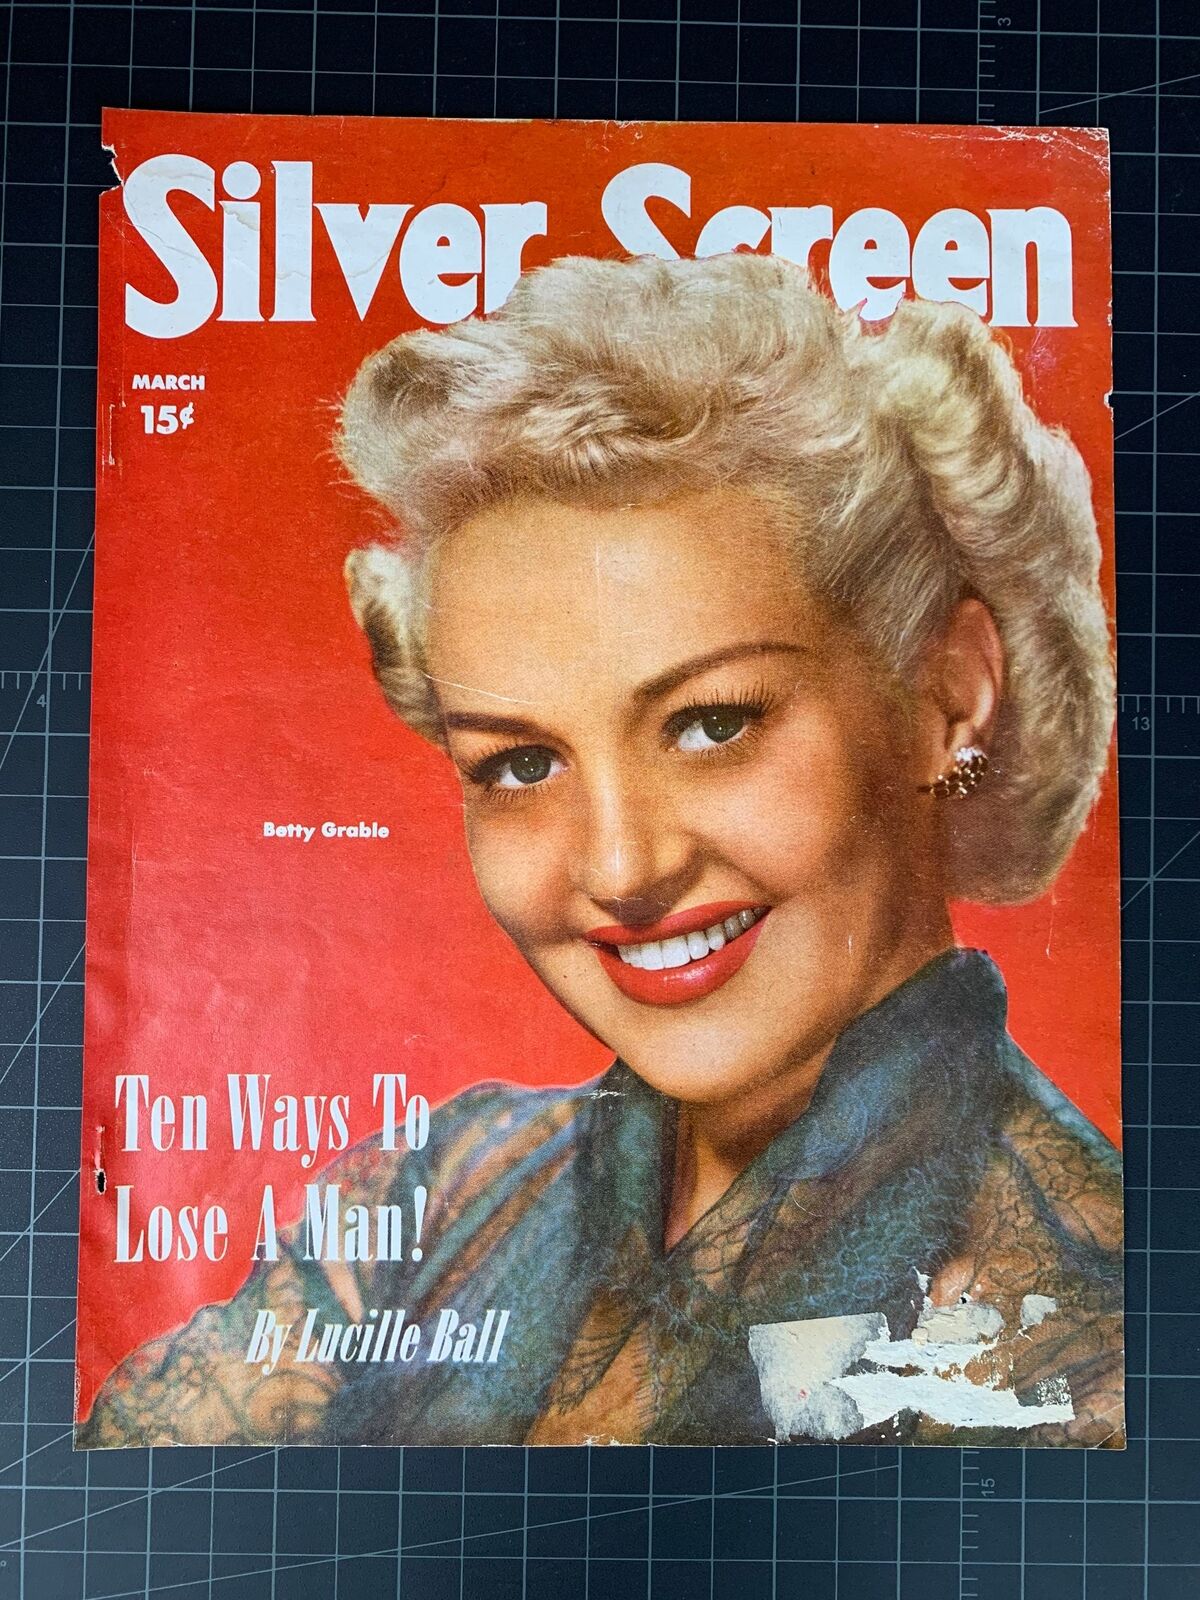 Vintage 1951 Silver Screen Magazine - Betty Grable